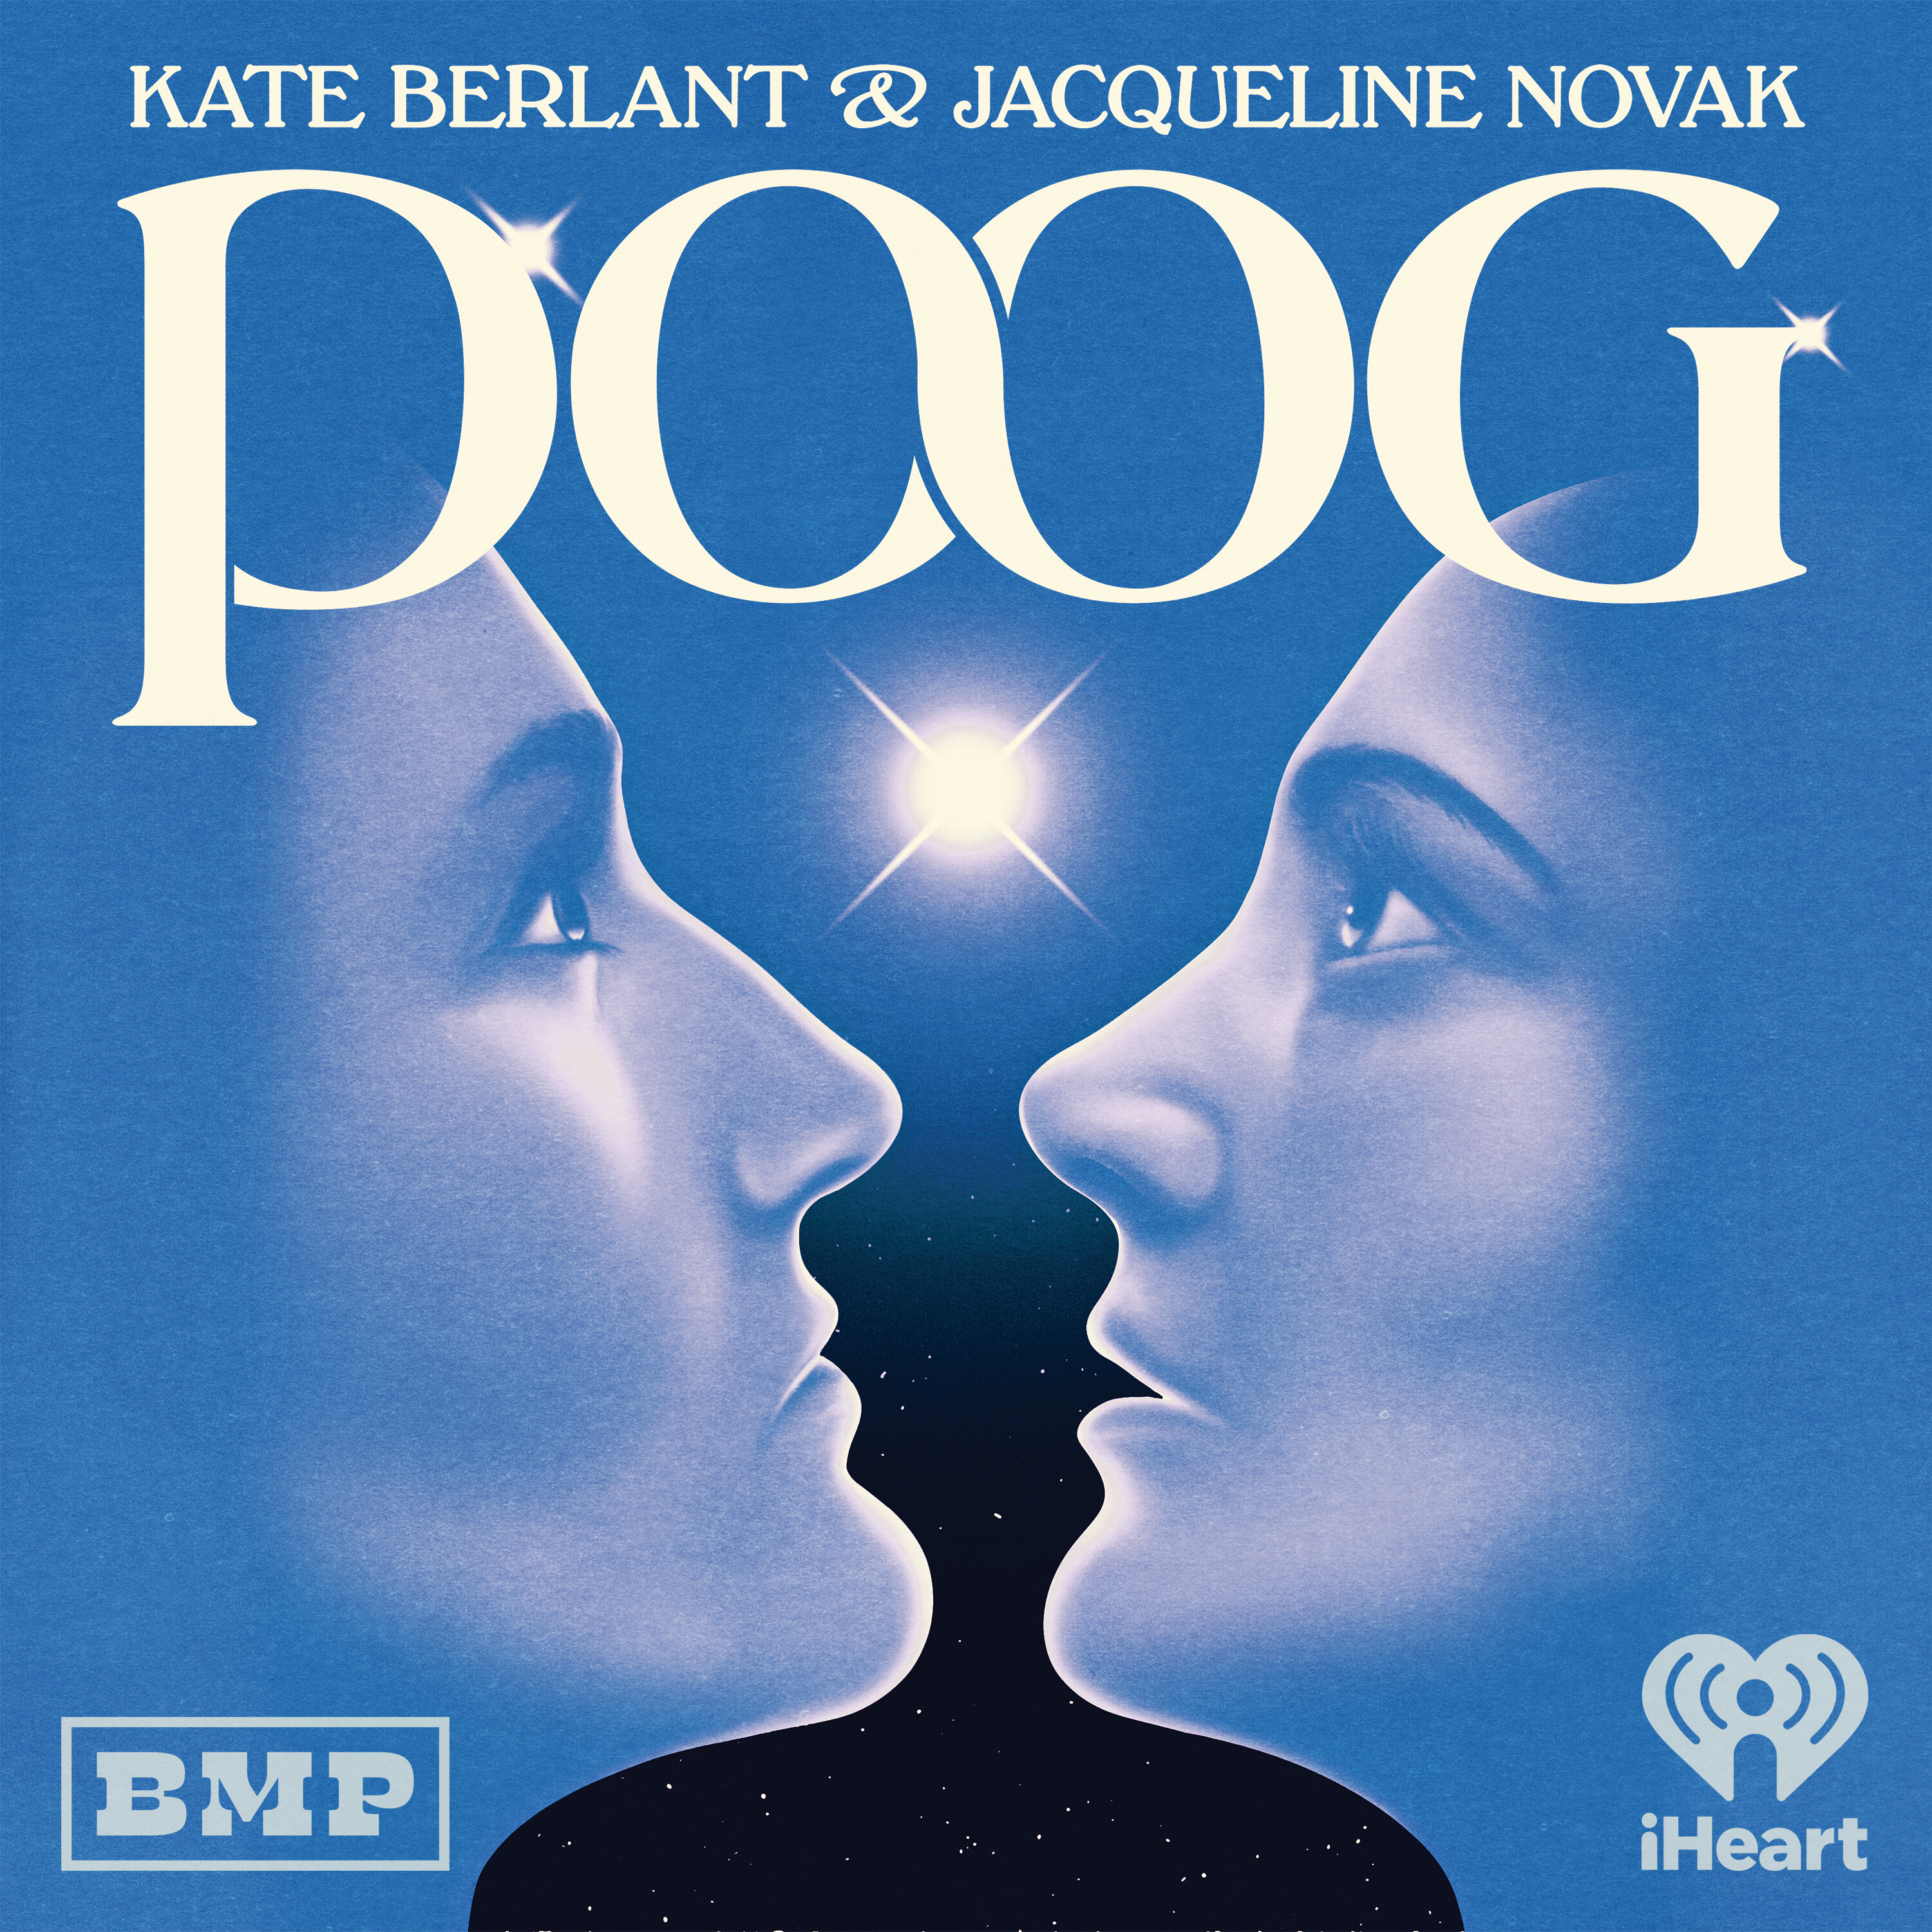 Poog with Kate Berlant and Jacqueline Novak podcast show image